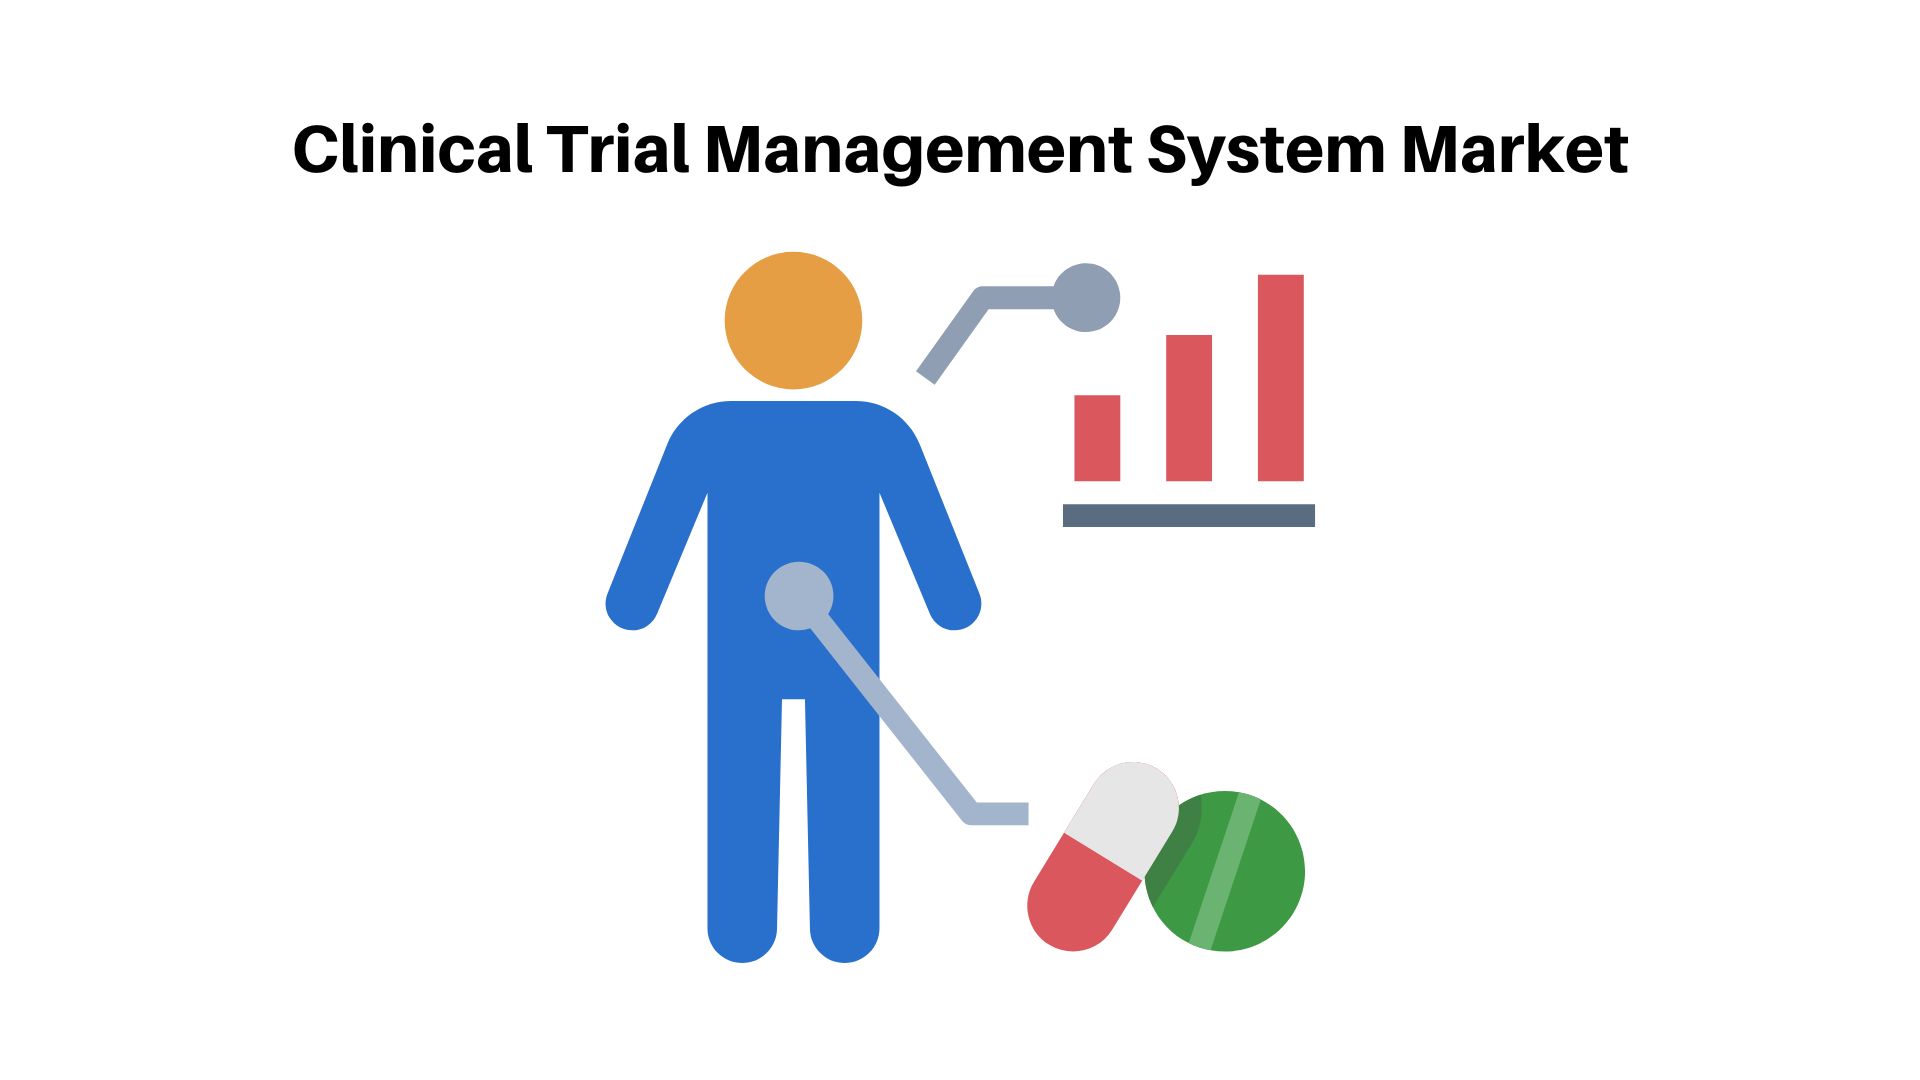 Clinical Trial Management System Market Is Encouraged to Reach USD 6.51 billion by 2032